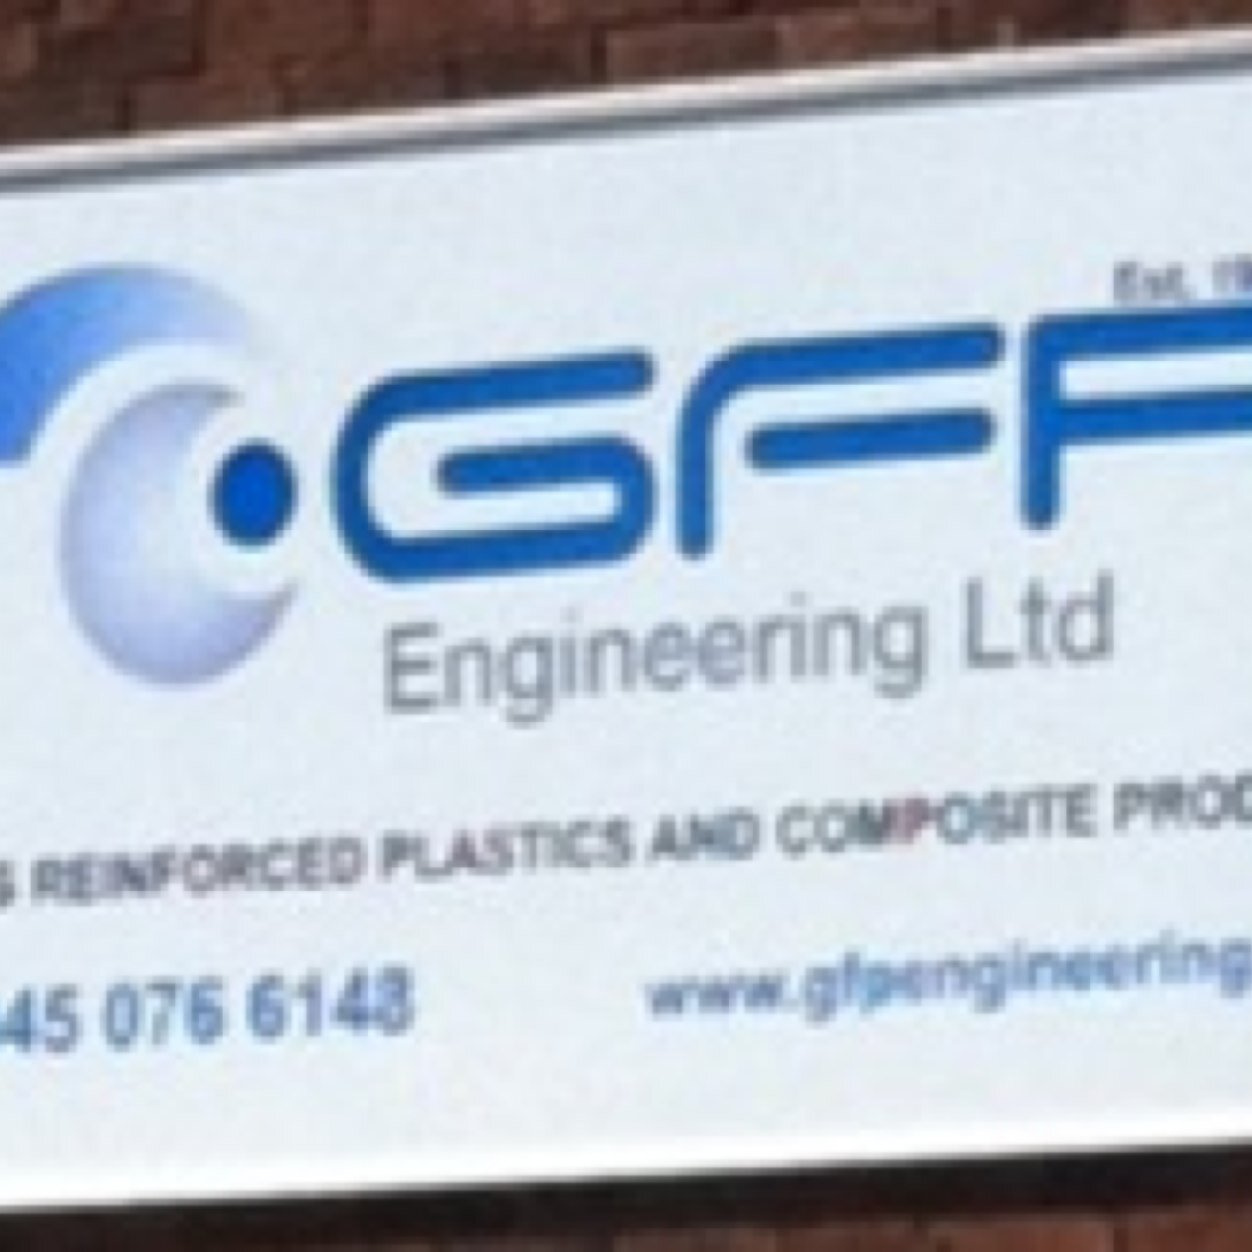 GRP / Fibreglass Engineering - Moulding and Fabrication company - GRP Grating - GRP Pultrusions - since 1968